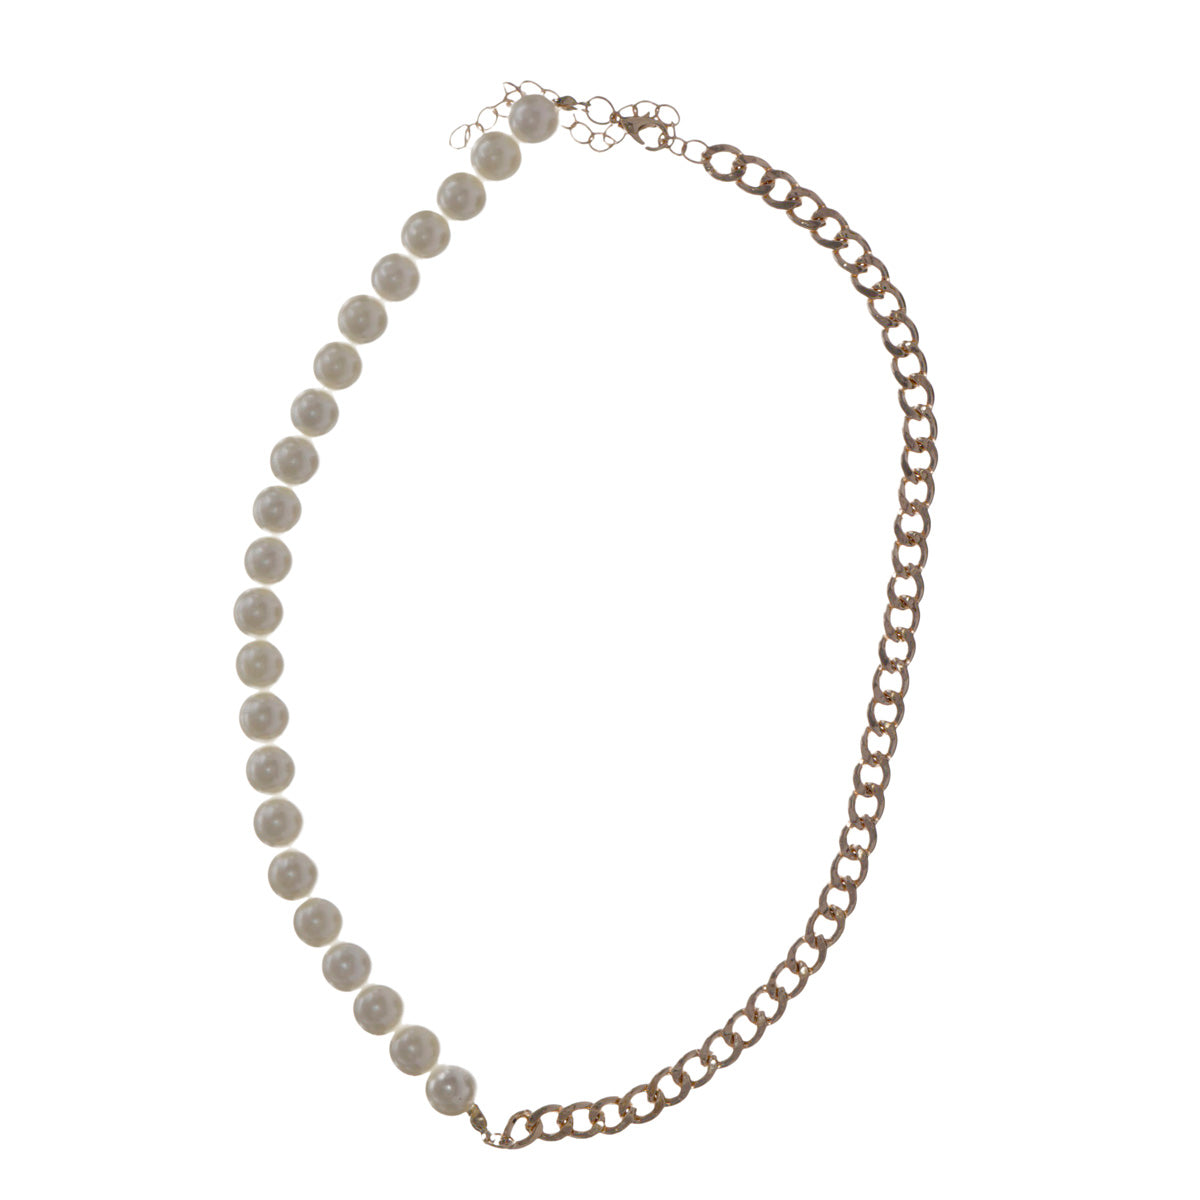 Pearl and chain necklace 46cm